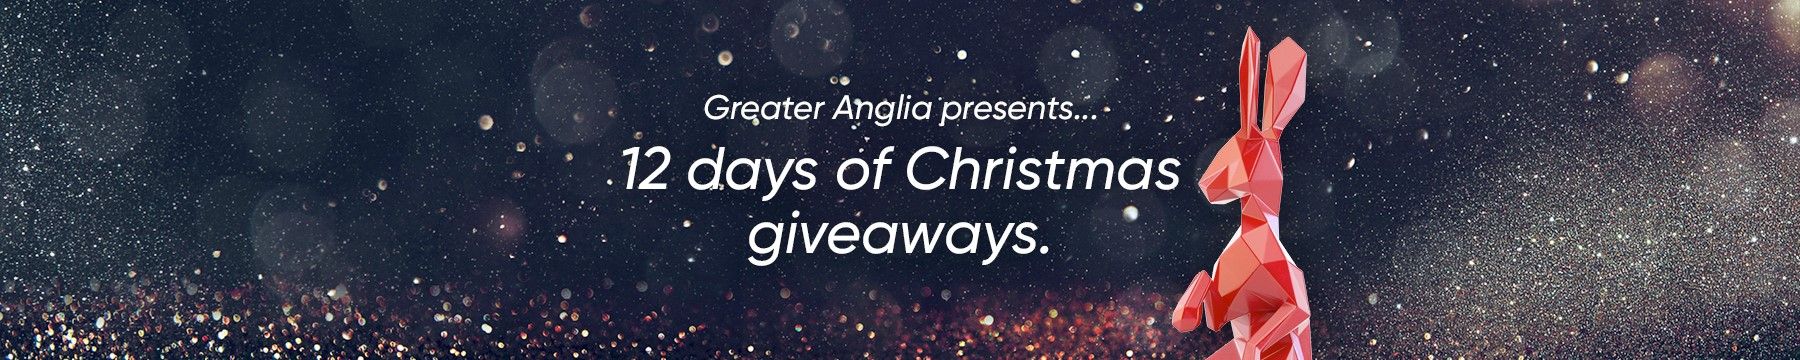 Greater Anglia 12 Days of Christmas giveaways